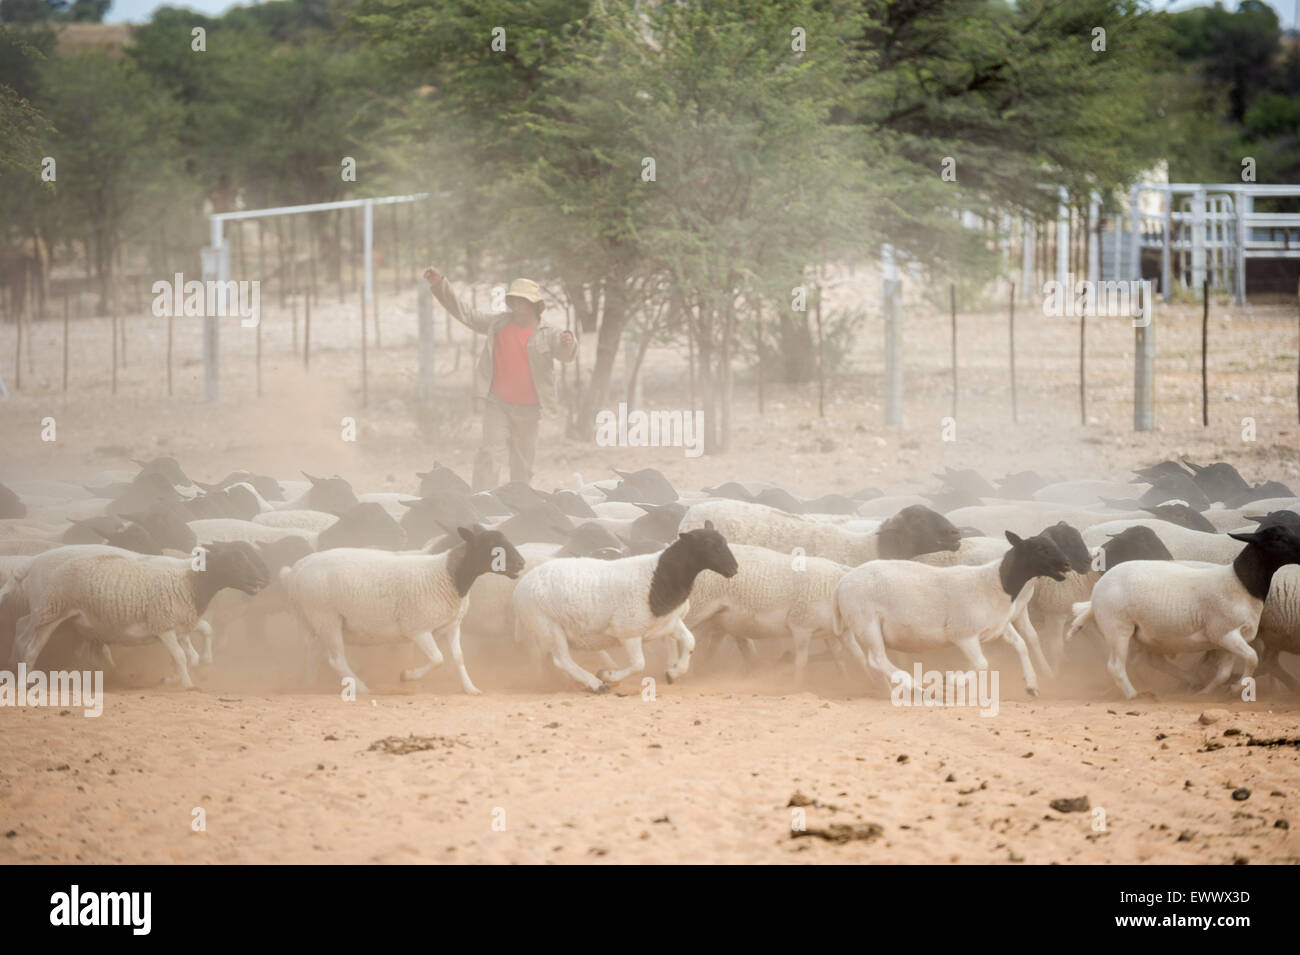 Namibia - Sheep on farm in Africa Stock Photo